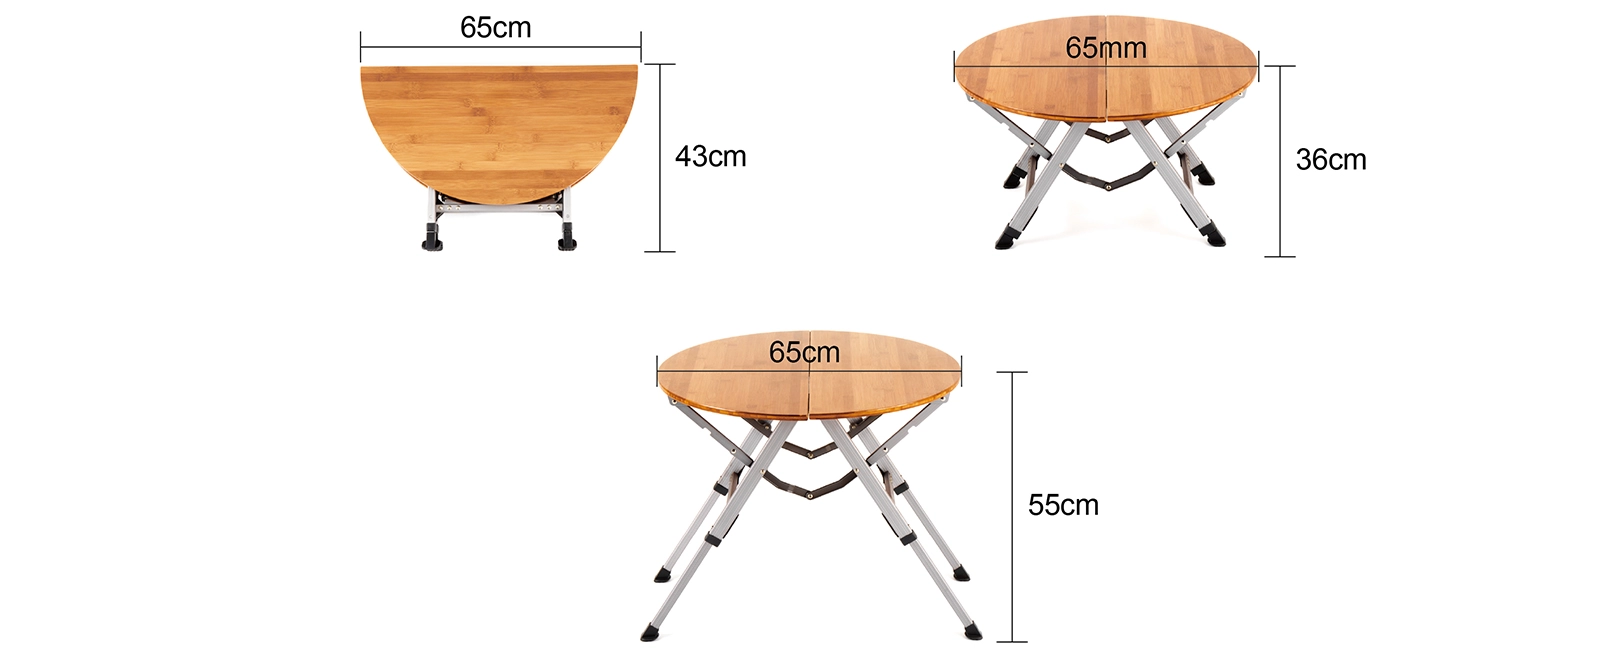 details of Bamboo Garden Round Type Folding Table